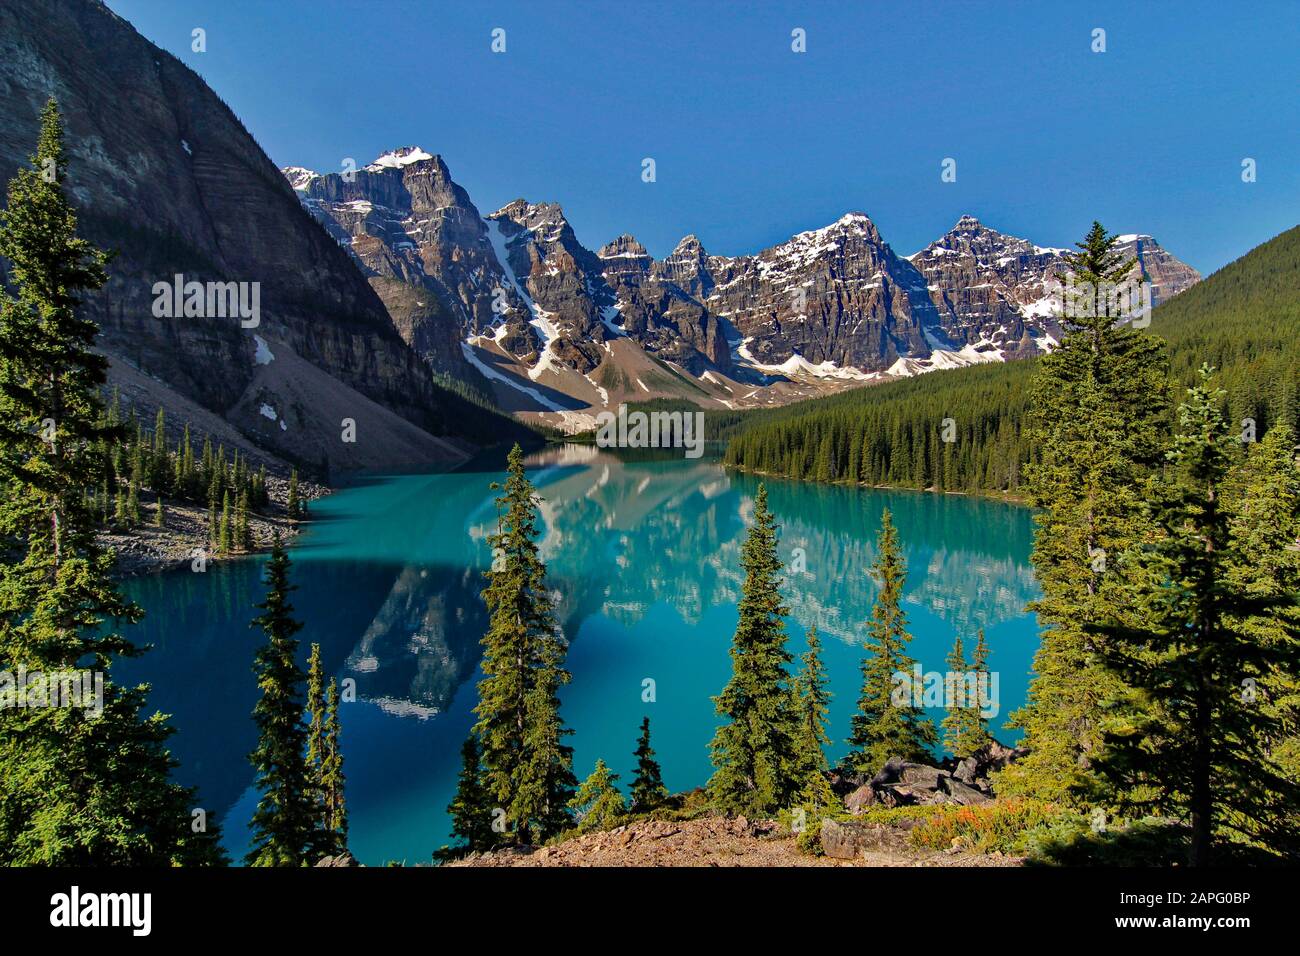 Moraine Lake, Valley of the Ten Peaks, Banff National Park, Rocky Mountains, Alberta, Canada Stock Photo